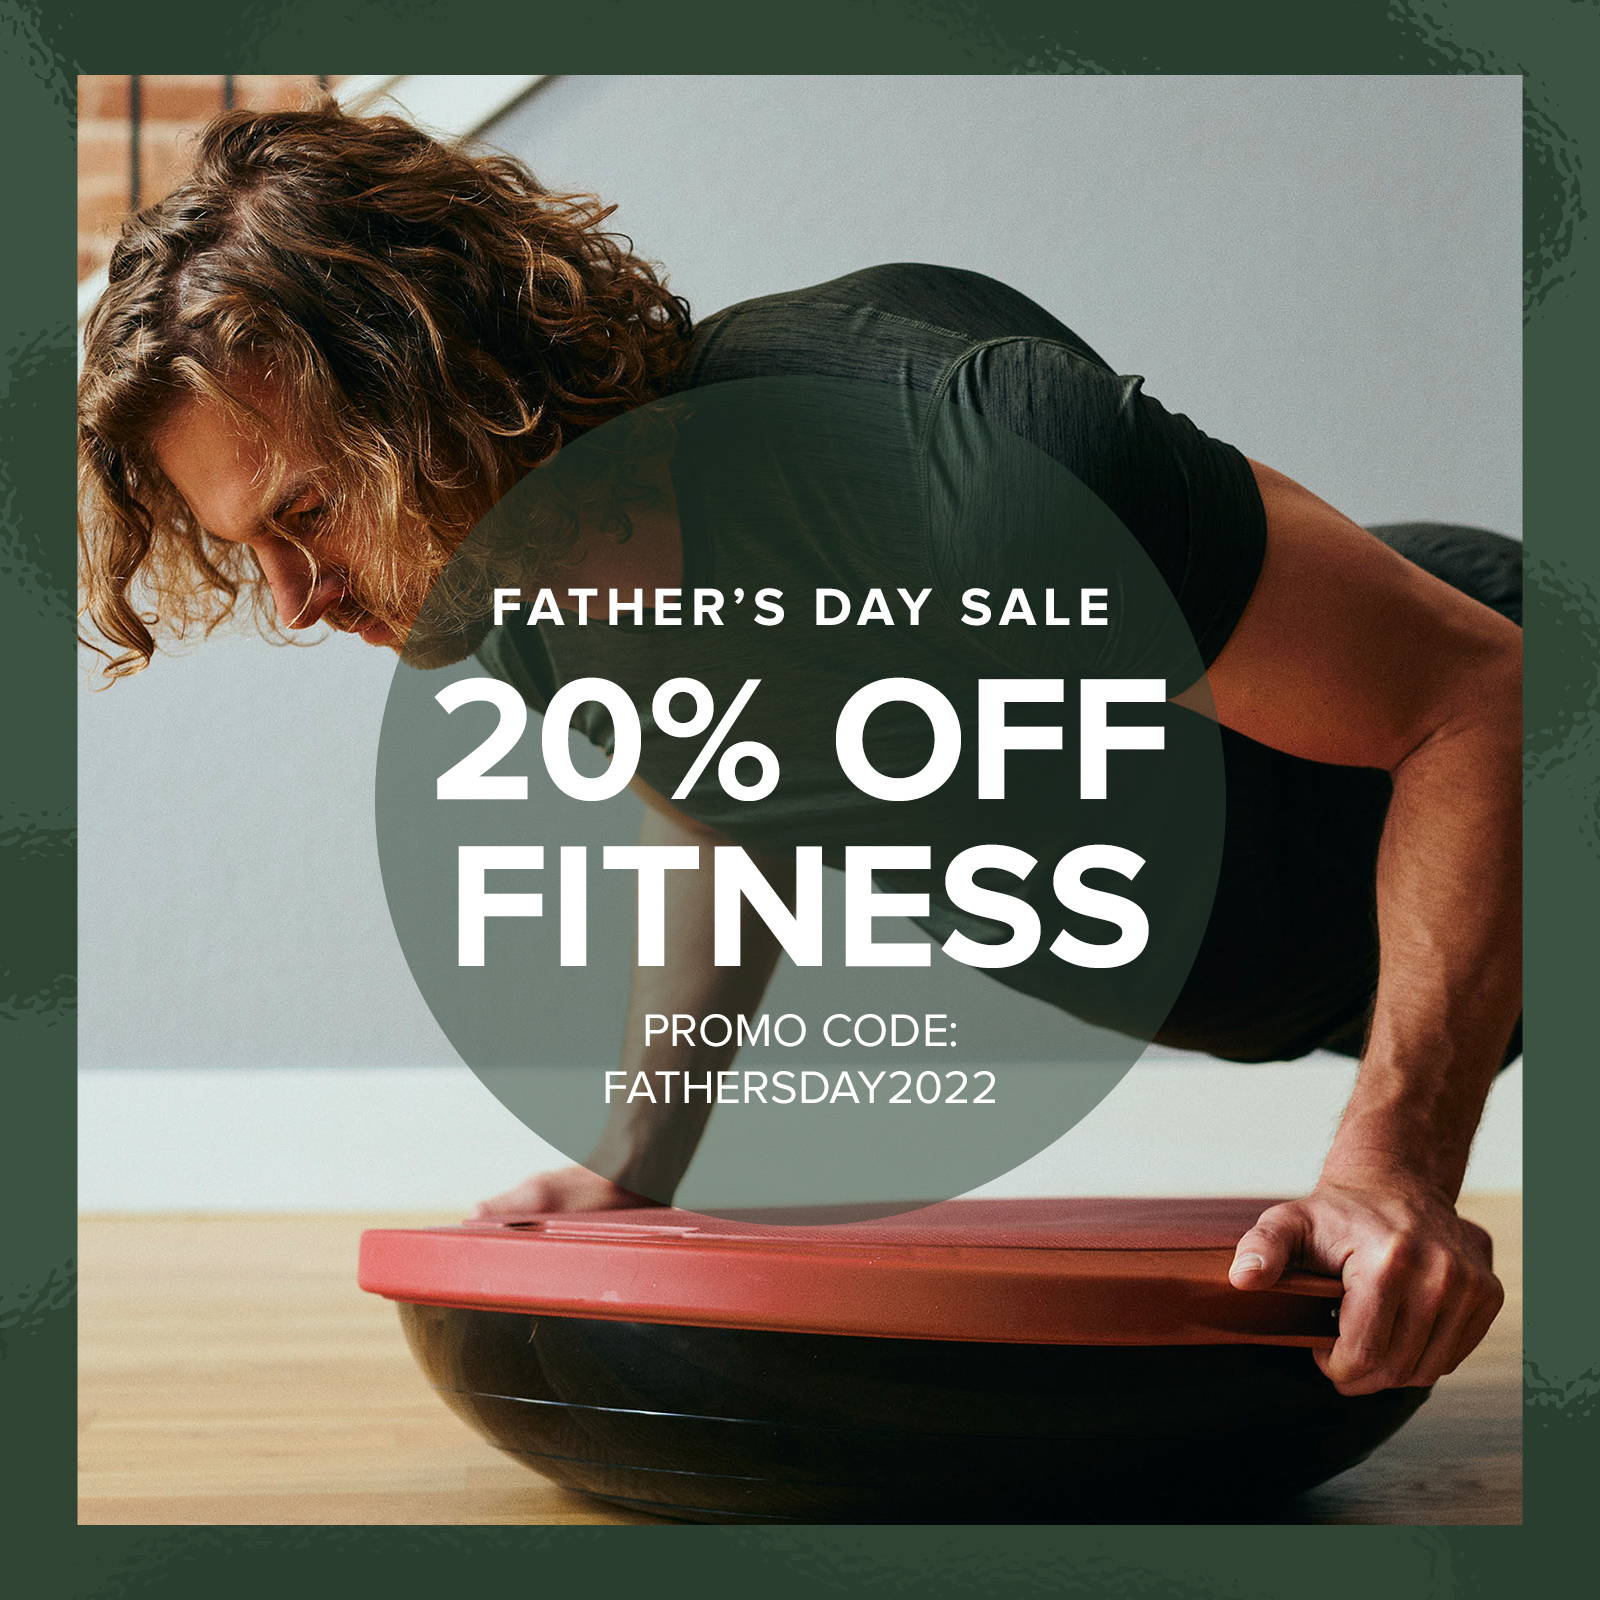 Father's Day Sale CODE: FATHERSDAY2022